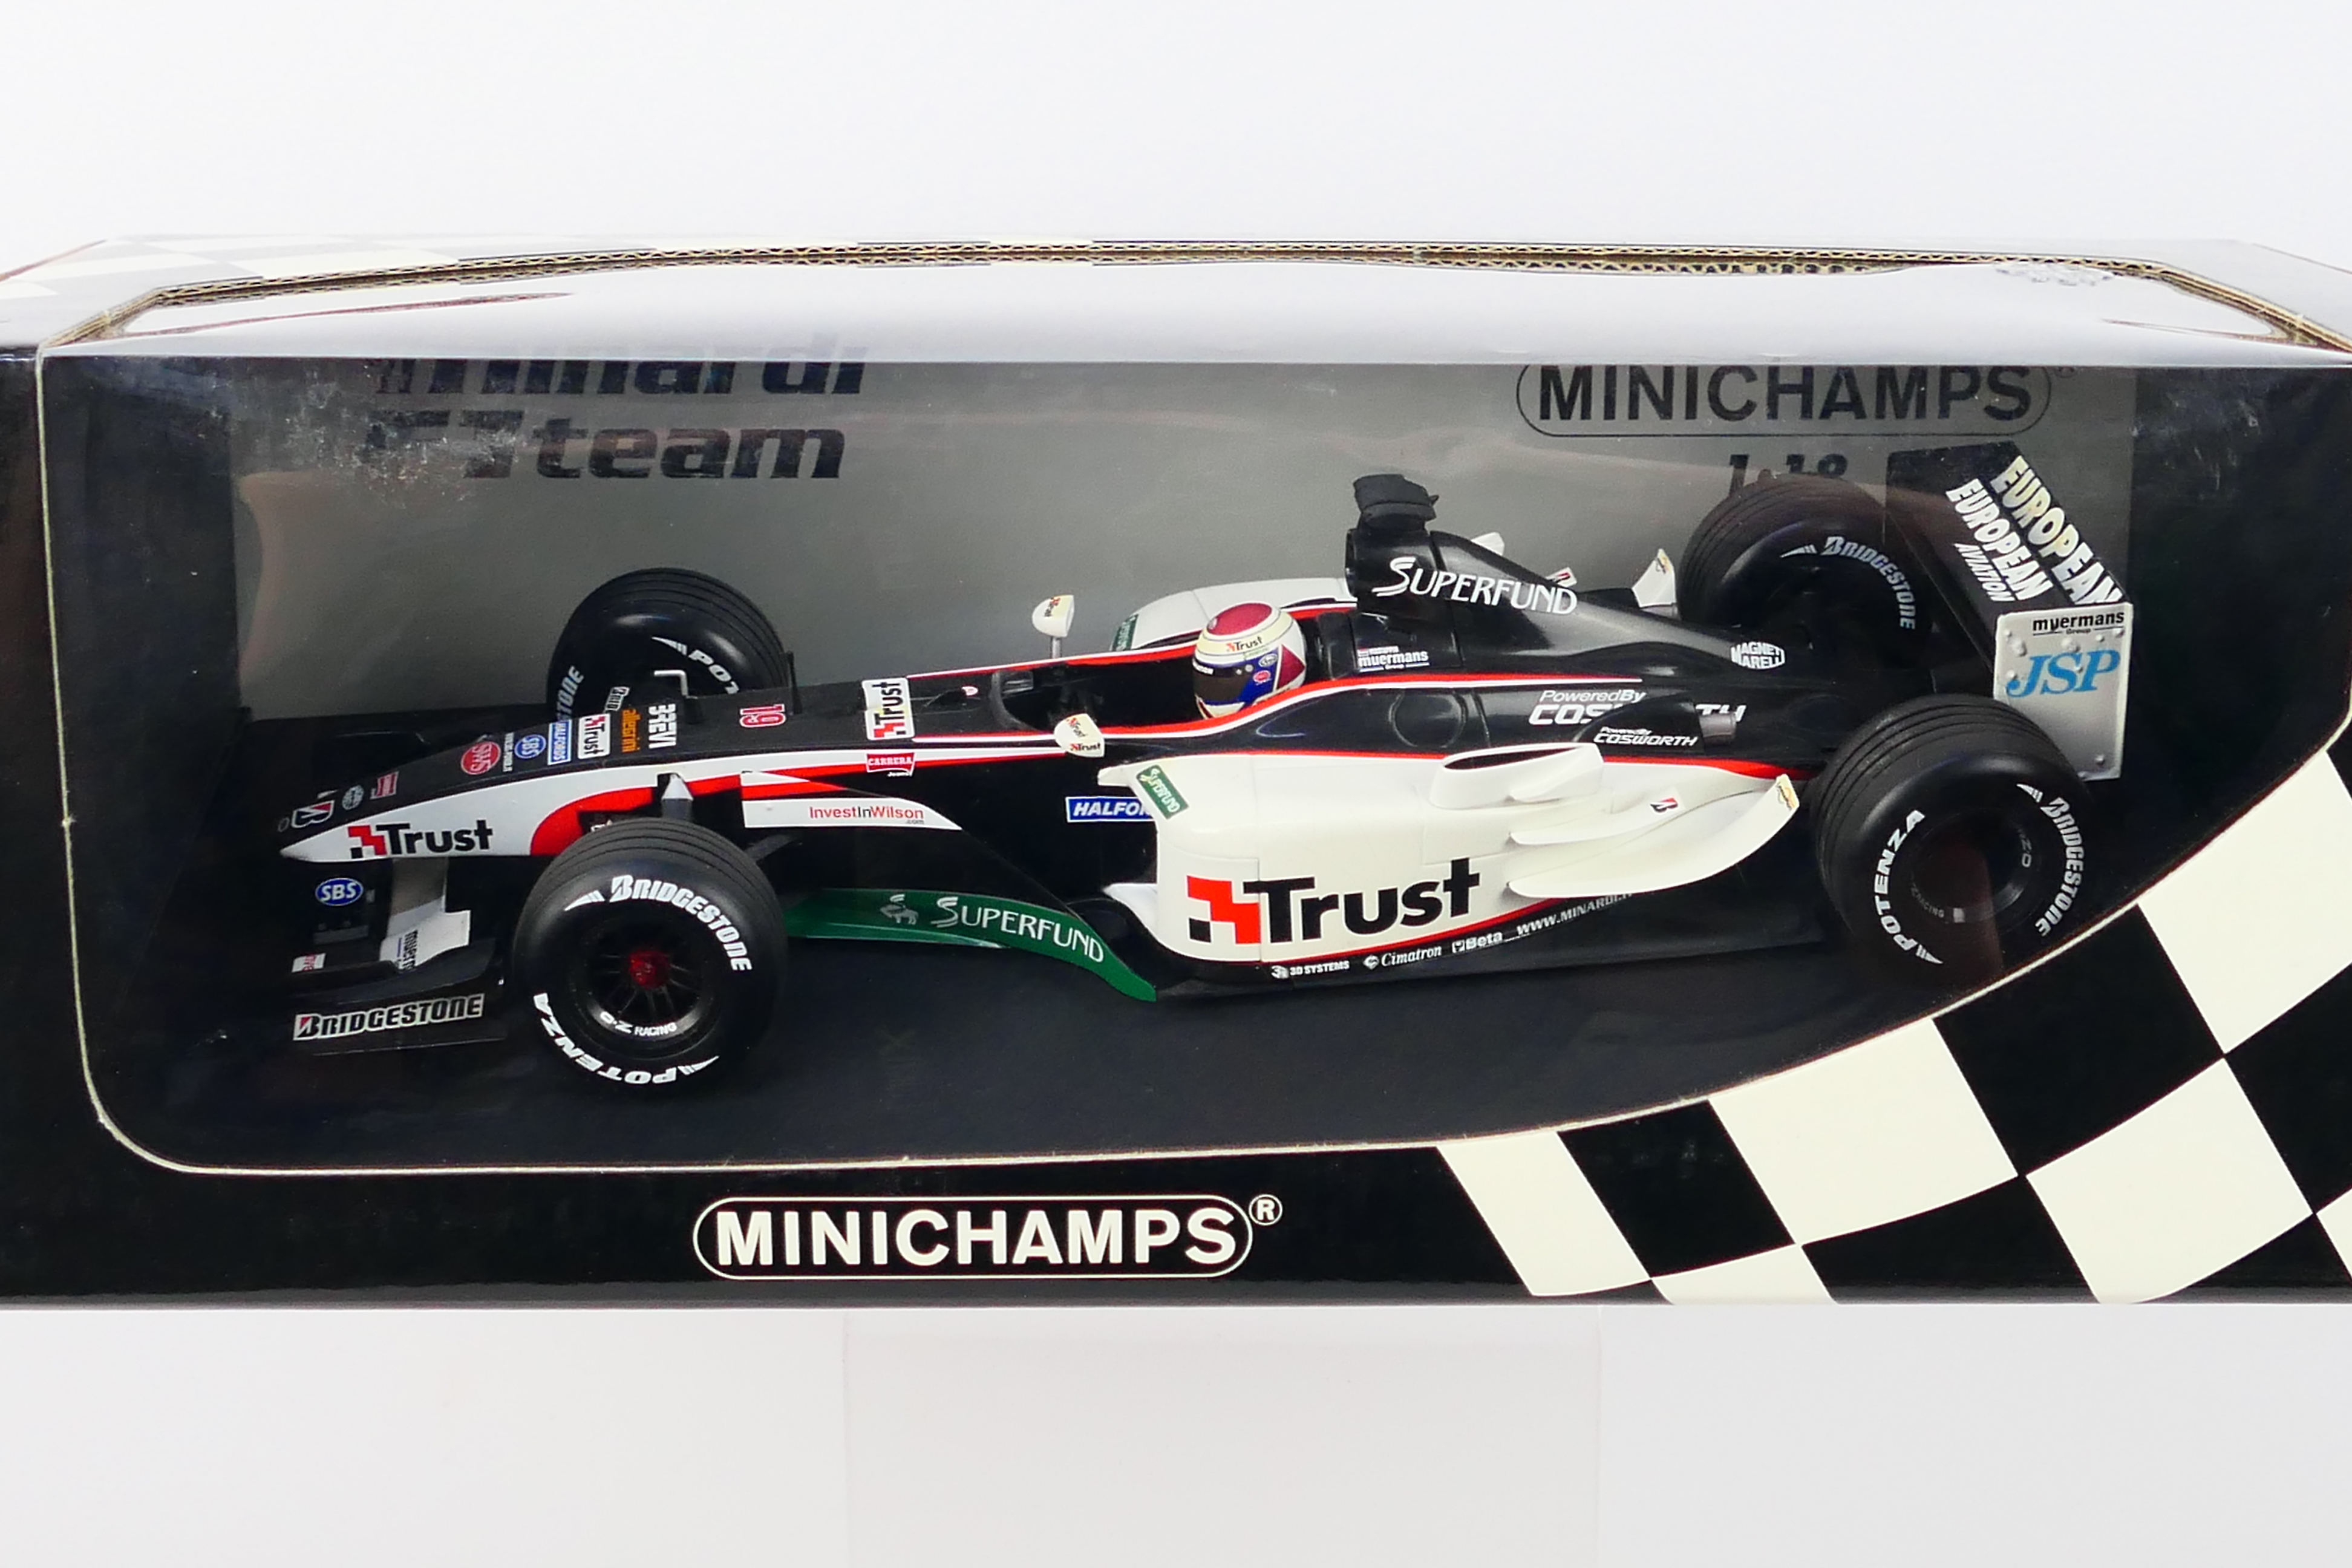 Minichamps- A boxed 1:18 scale European Minardi Cosworth PS03 Jos Verstappen car which appears Mint - Image 2 of 3